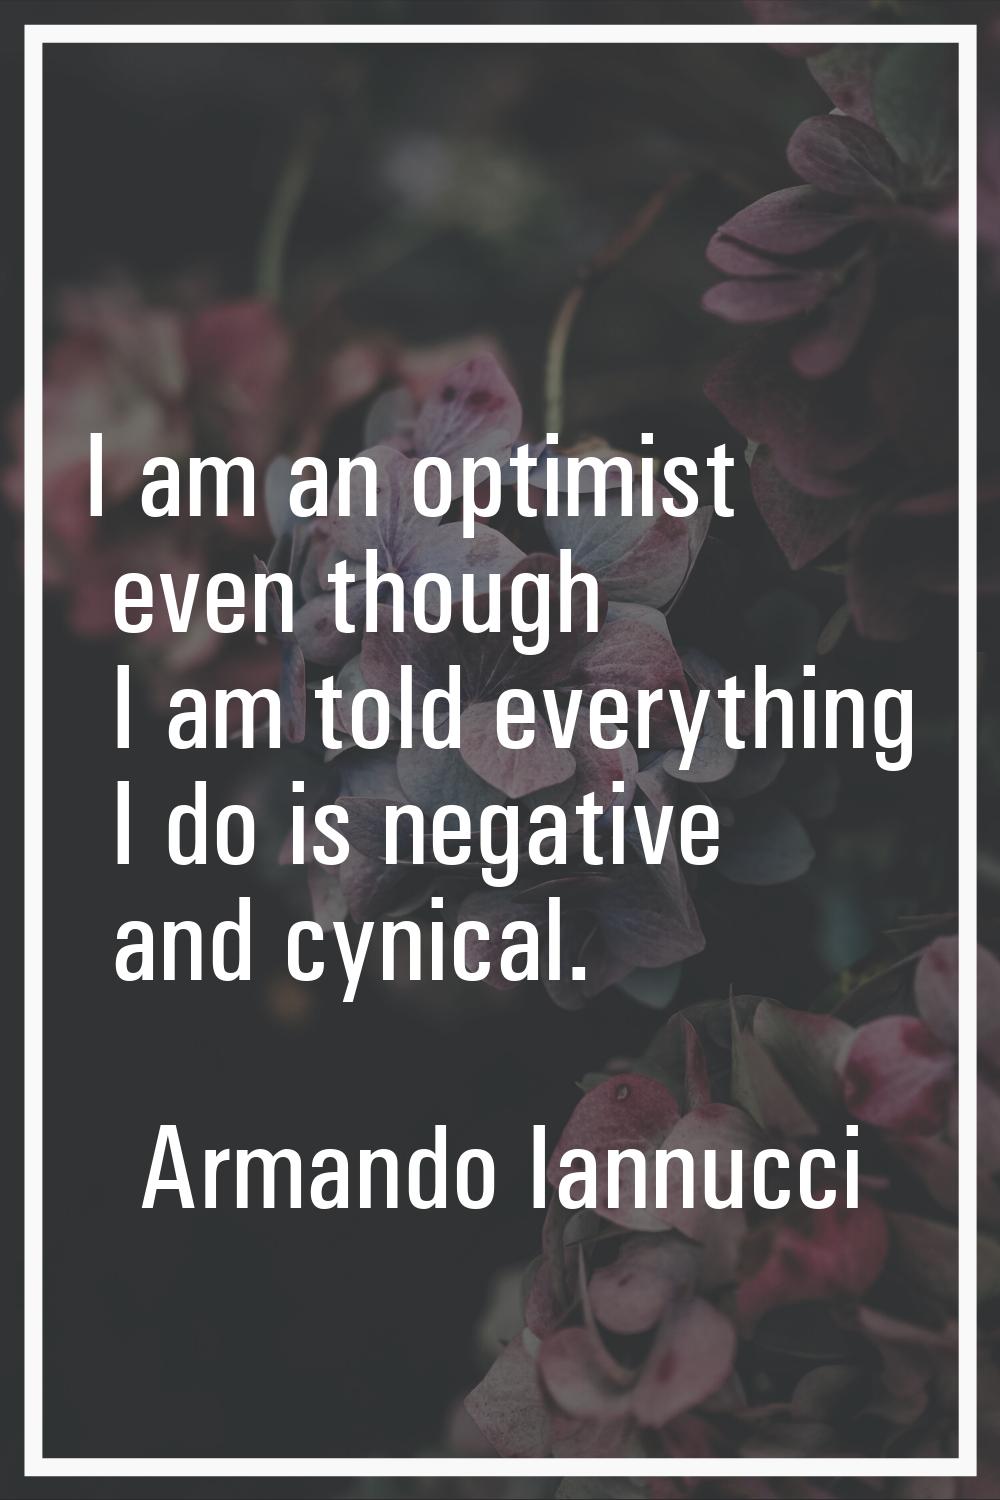 I am an optimist even though I am told everything I do is negative and cynical.